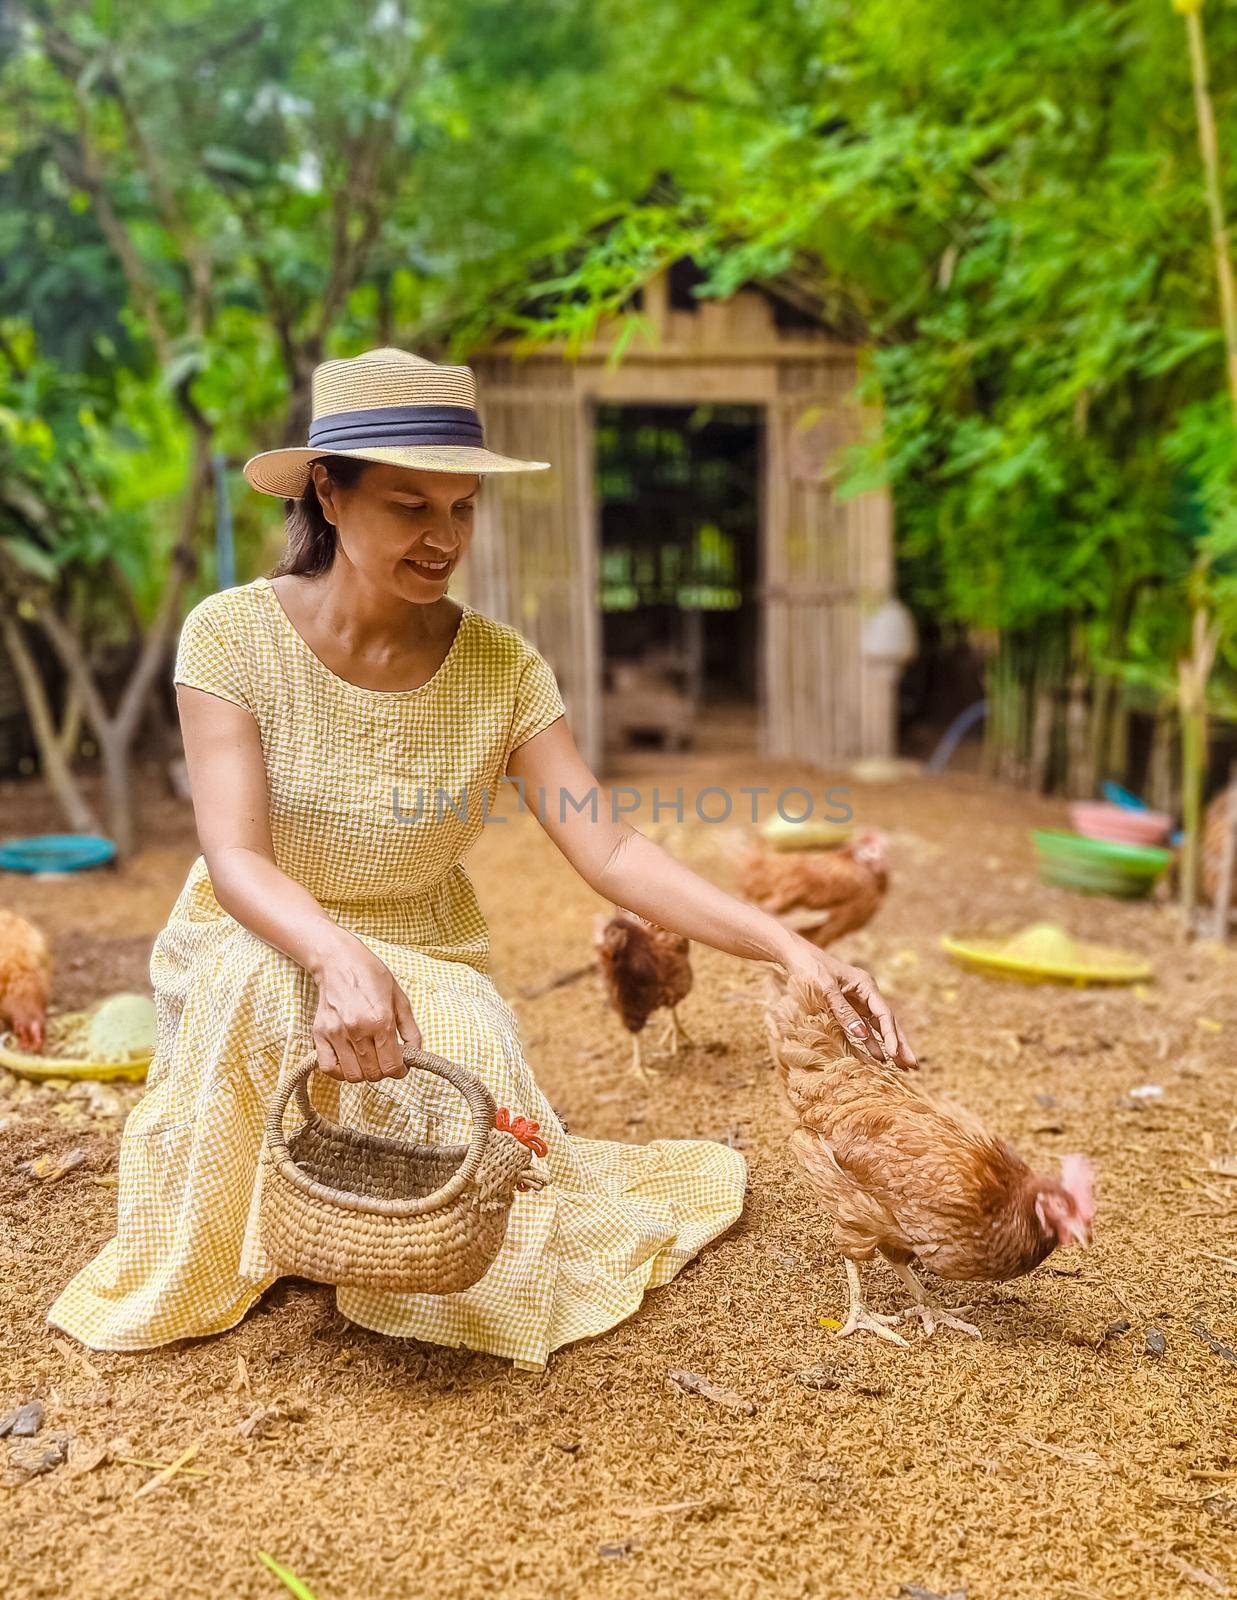 Eco farm homestay with a rice field in central Thailand, paddy field of rice during rain monsoon season in Thailand. Asian woman at a homestay farm in Thailand feeding chicken